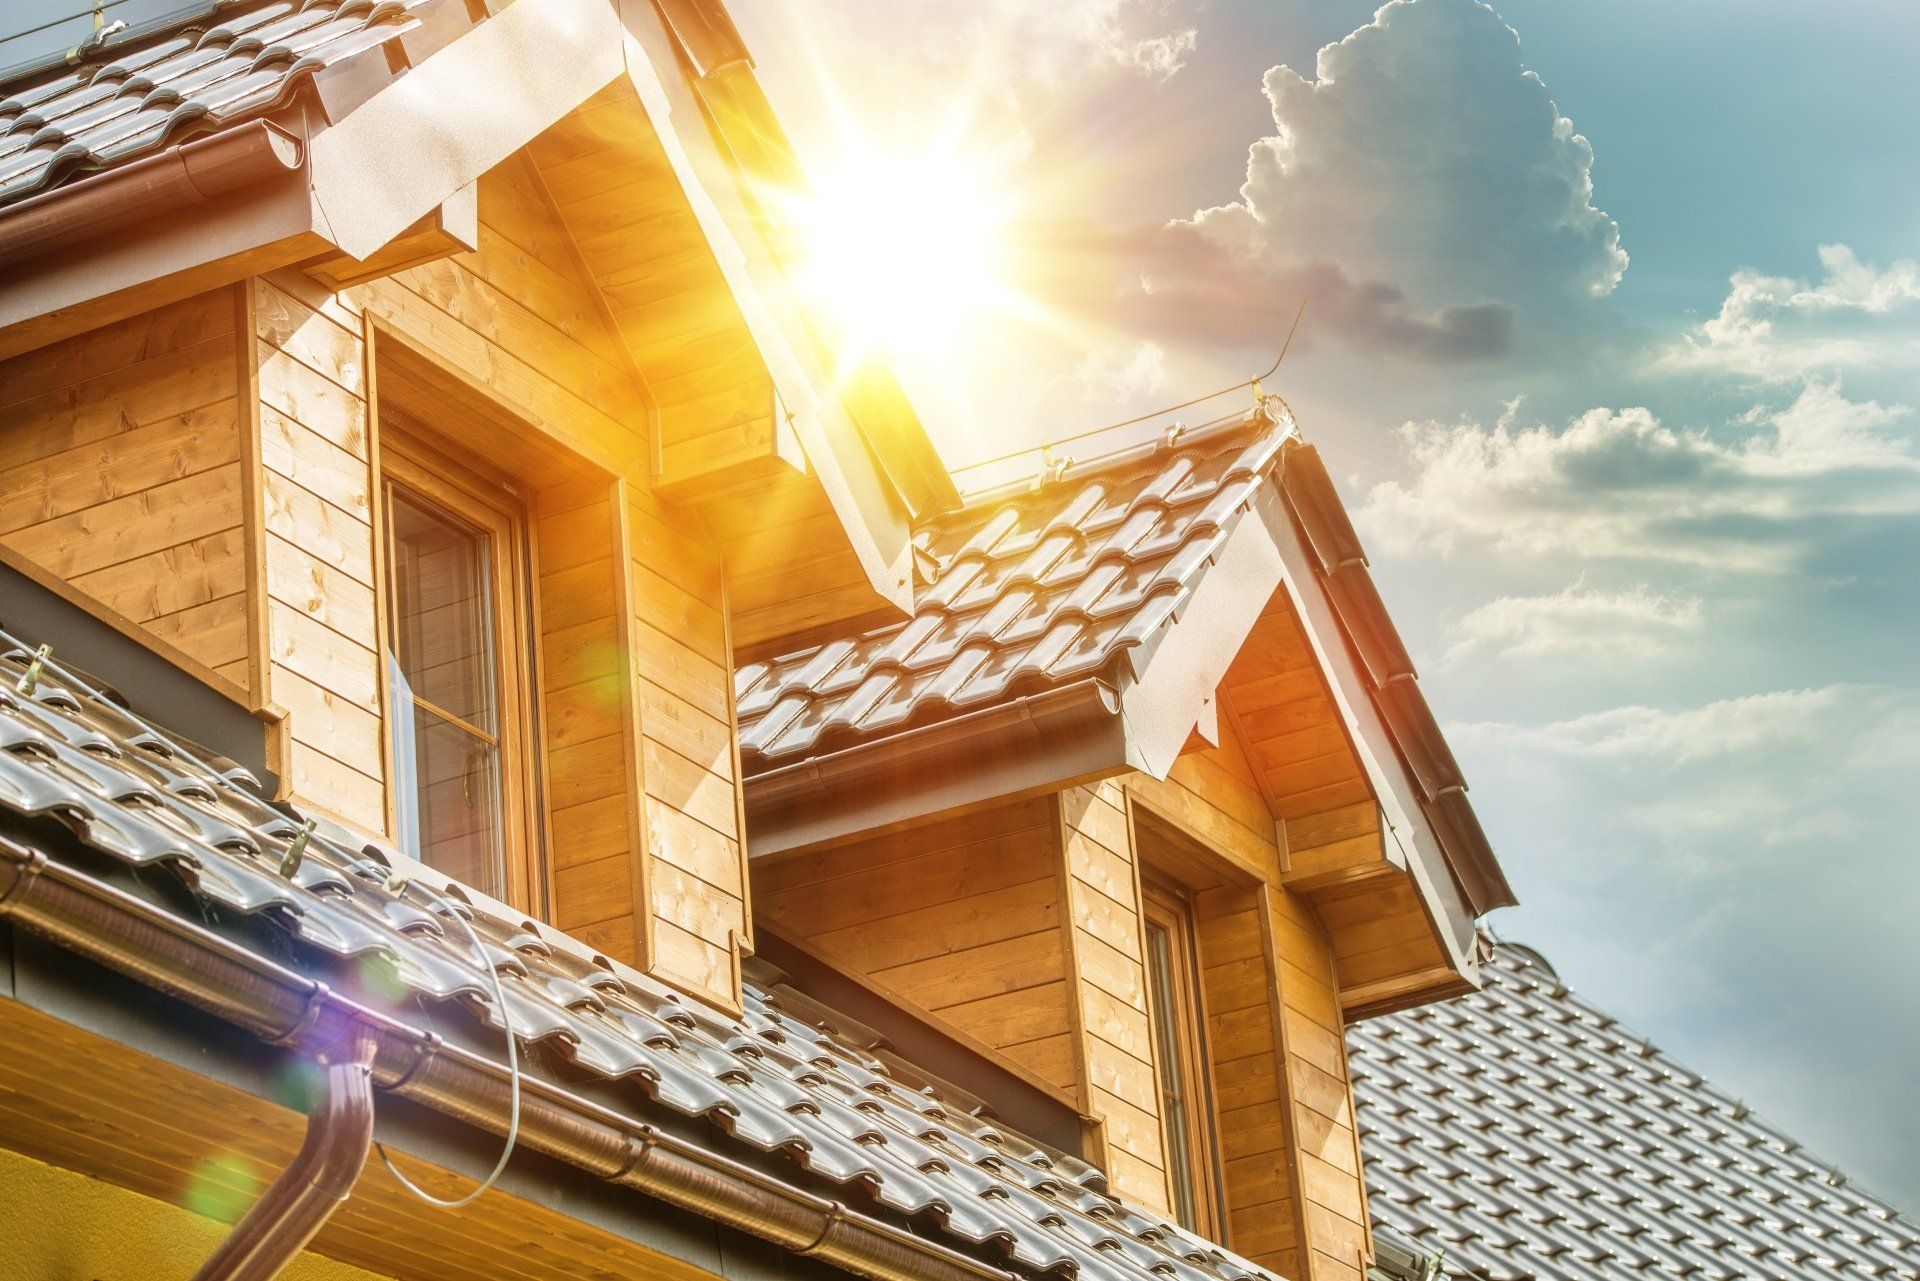 can the sun damage your roof?